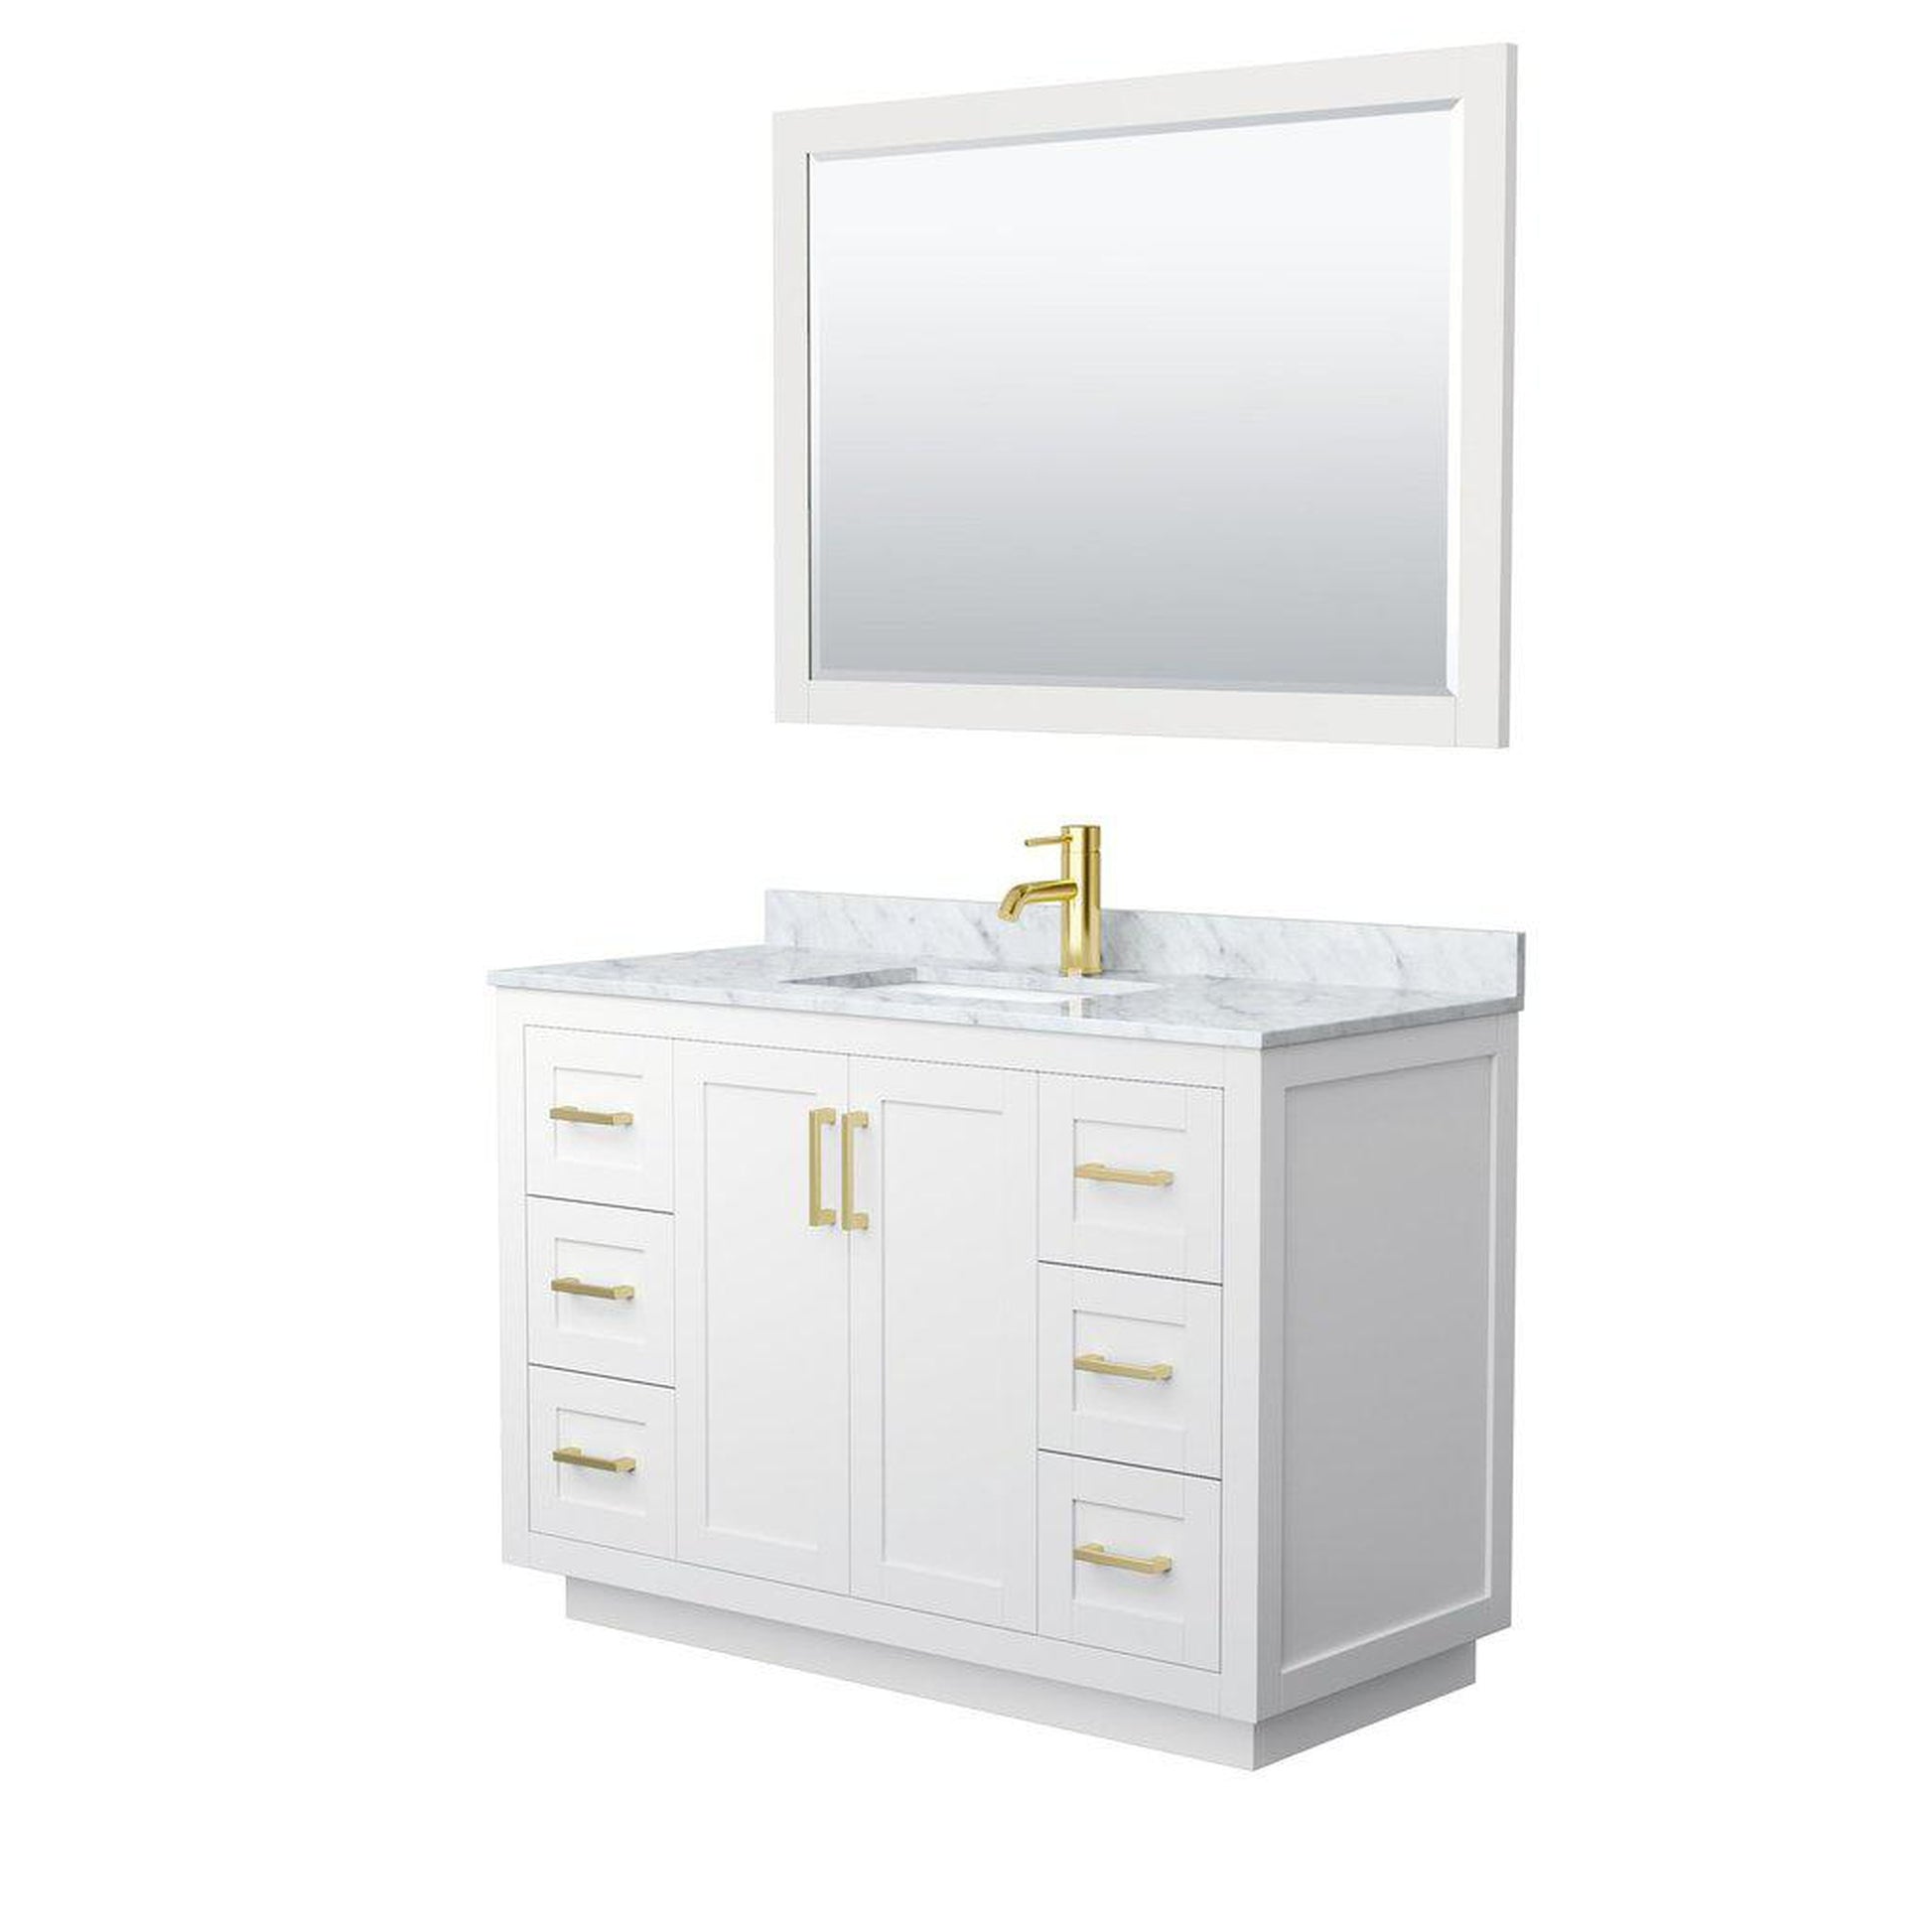 Wyndham Collection Miranda 48" Single Bathroom White Vanity Set With White Carrara Marble Countertop, Undermount Square Sink, 46" Mirror And Brushed Gold Trim